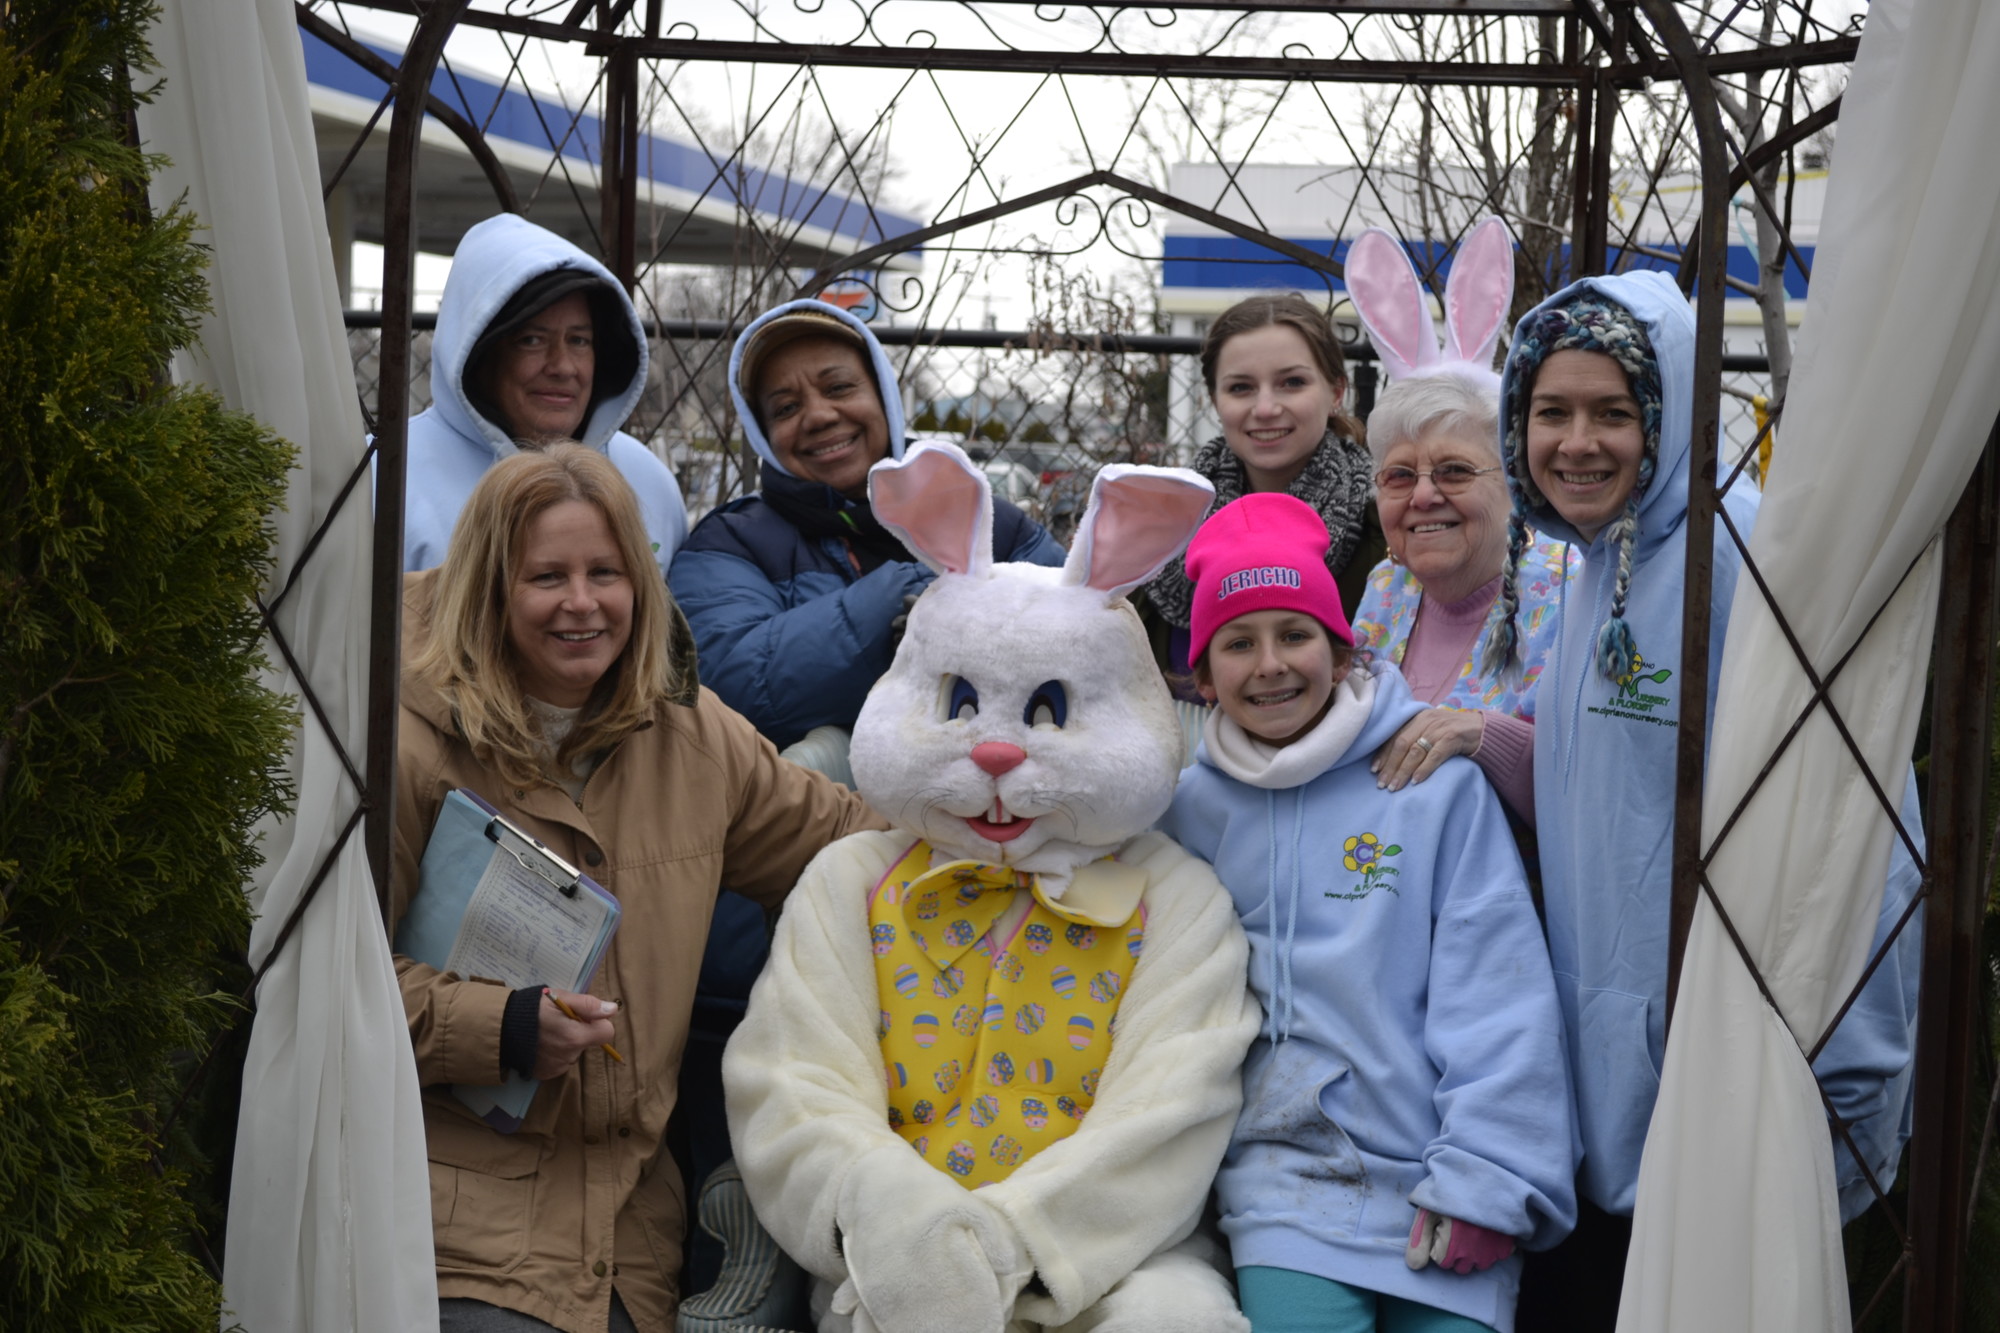 The cipriano staff and their guest of honor, the Easter Bunny, continued their annual holiday tradition of hosting an egg hunt for local children at their Front Street nursery last Saturday.